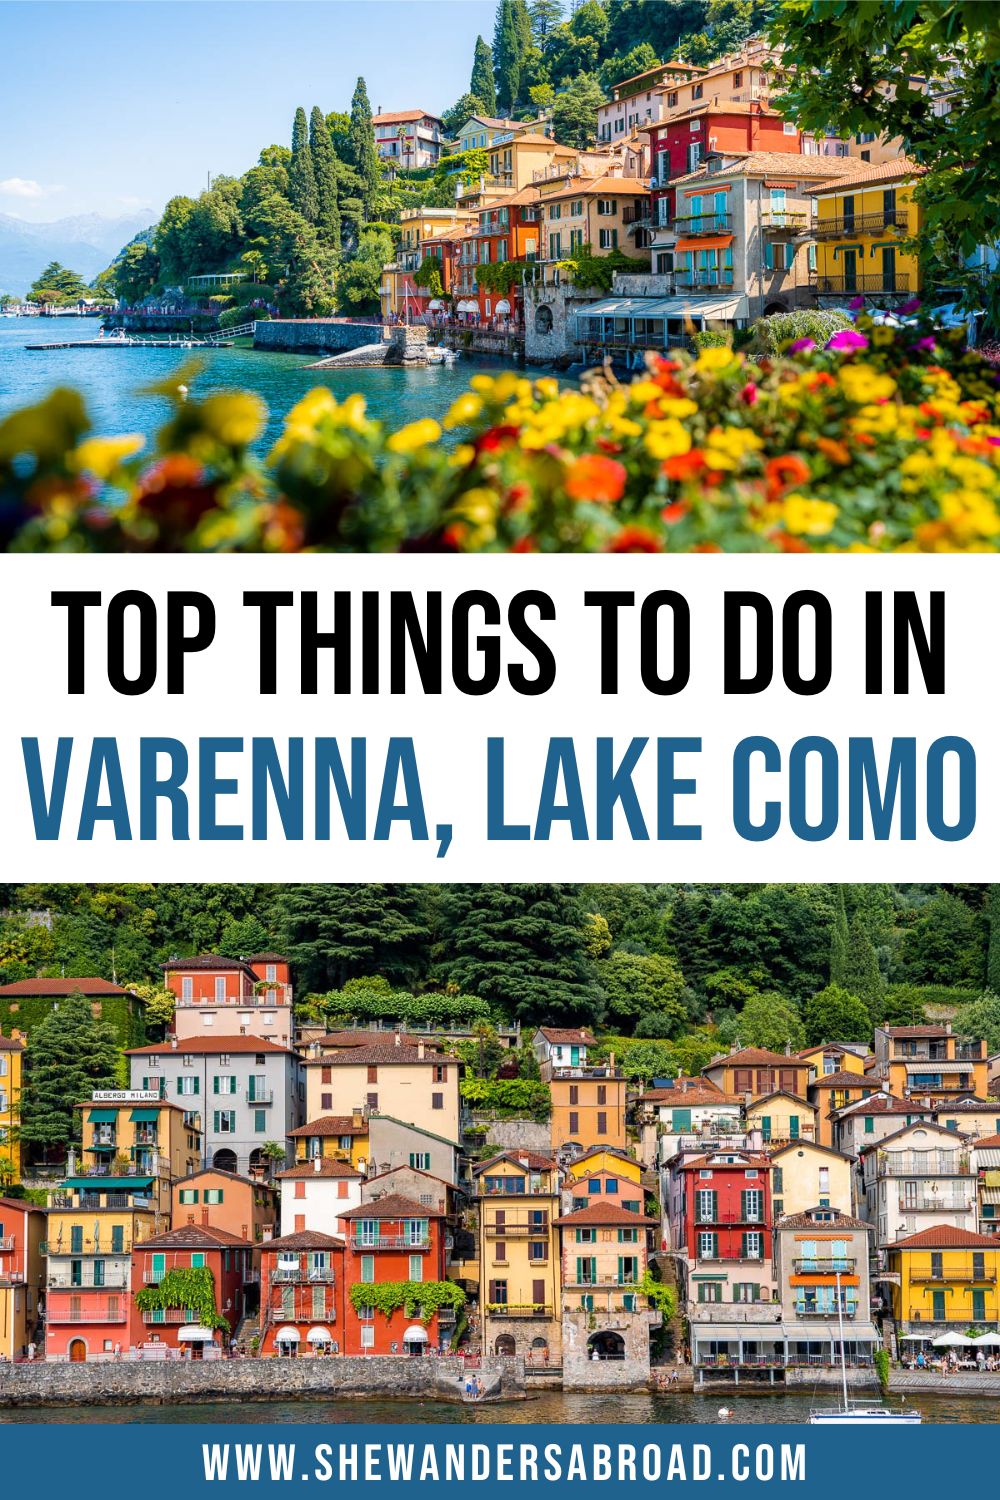 15 Best Things to Do in Varenna (+ Practical Tips for Visiting)